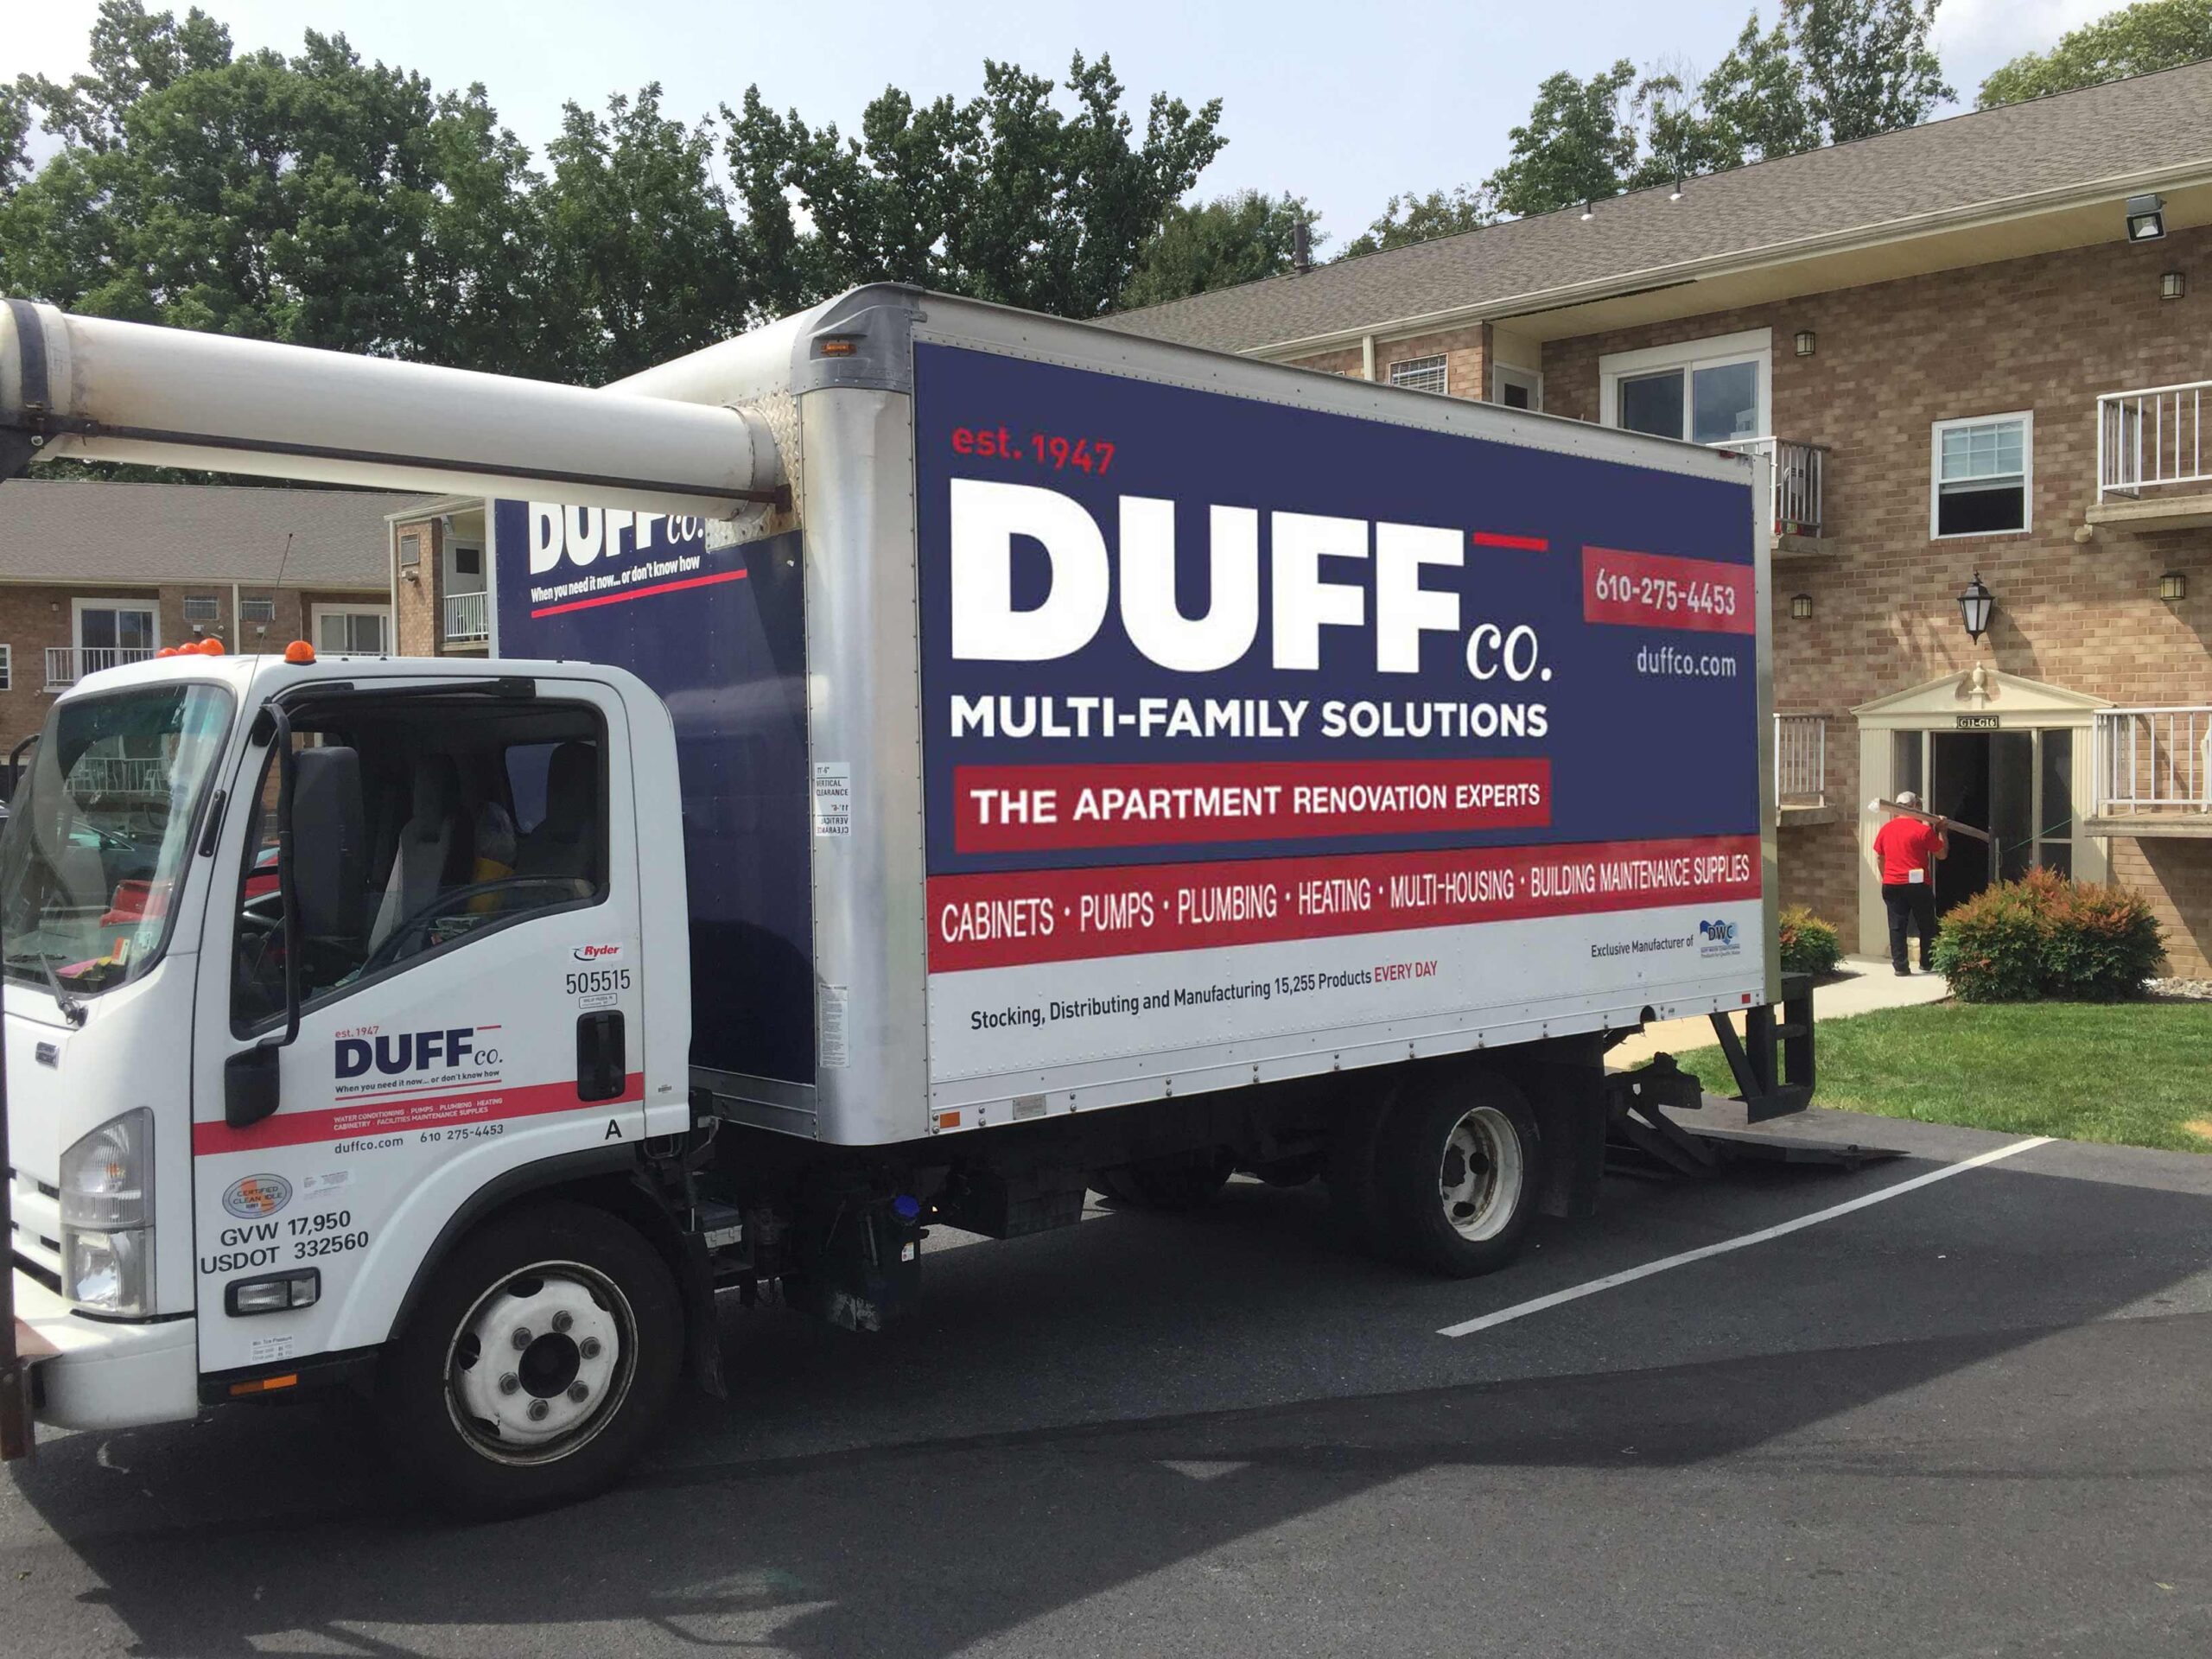 Duff Multifamily Truck in front of apartment building